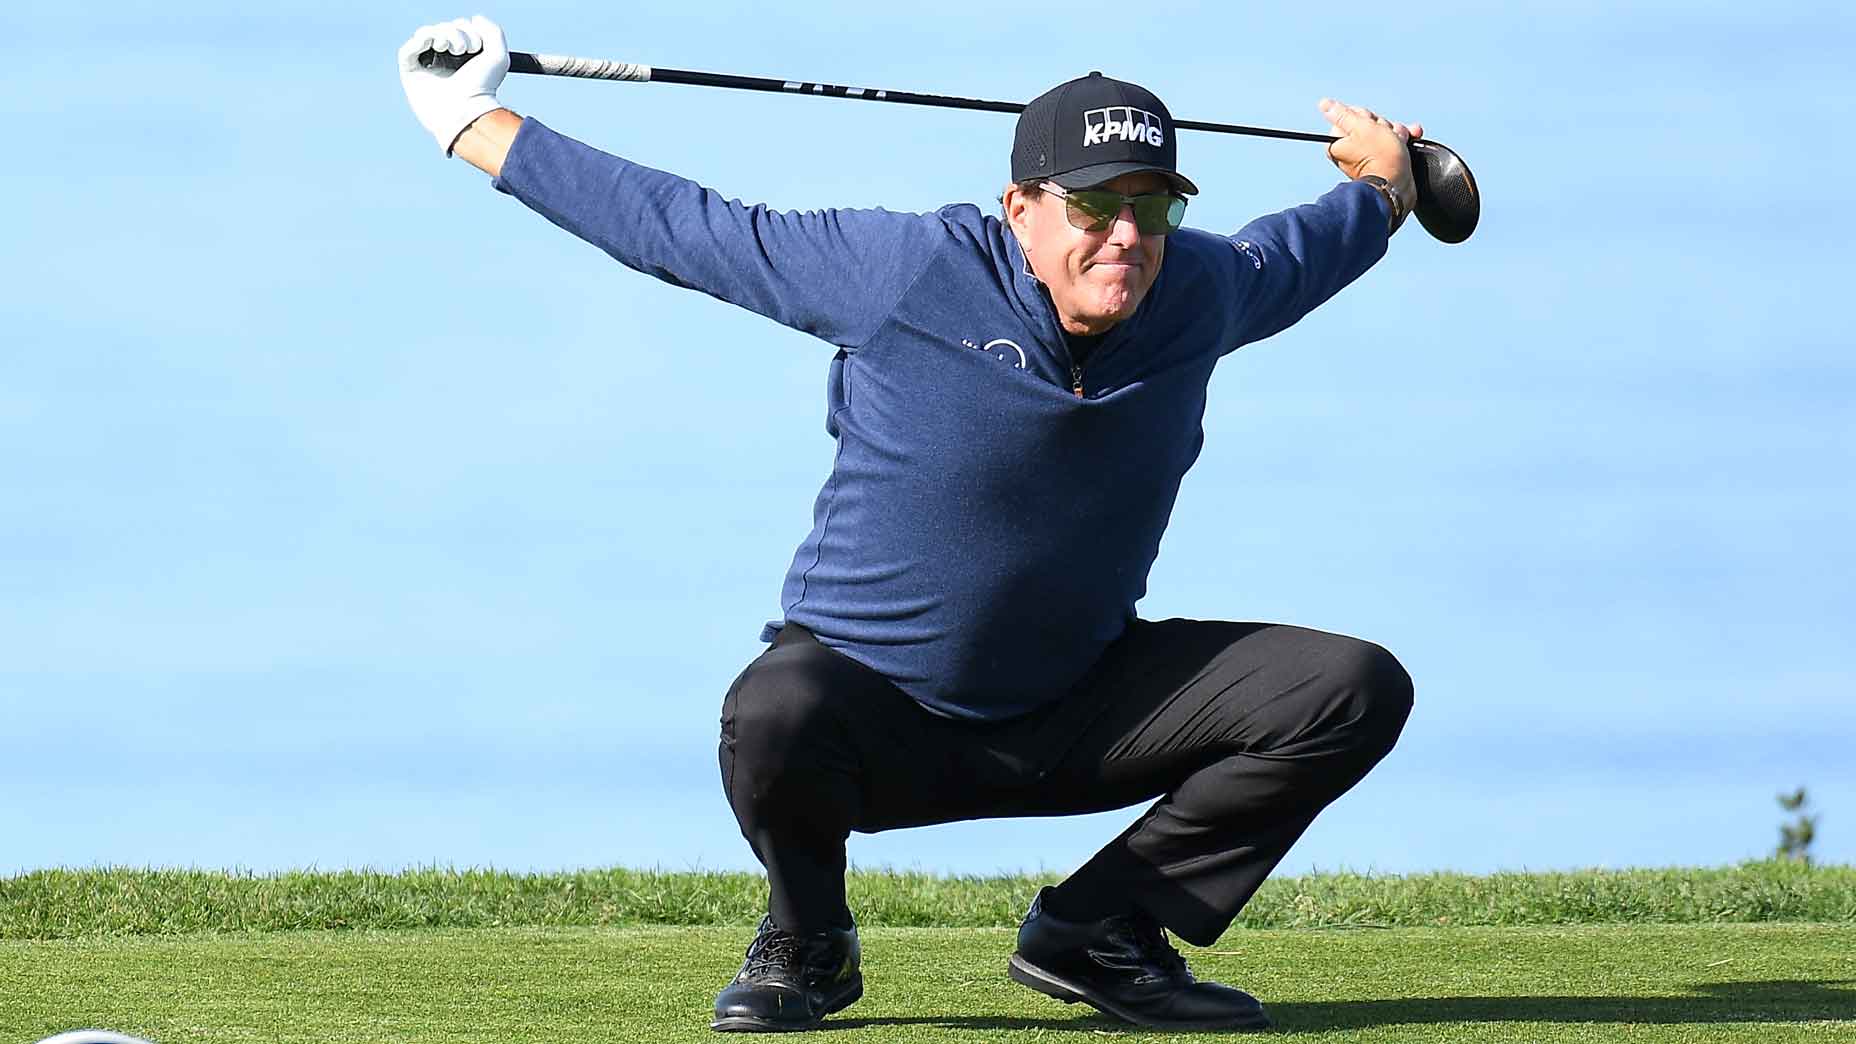 Phil Mickelson stretches on the 11th hole on the North Course during the first round of the Farmers Insurance Open golf tournament at Torrey Pines Municipal Golf Course on January 28, 2021